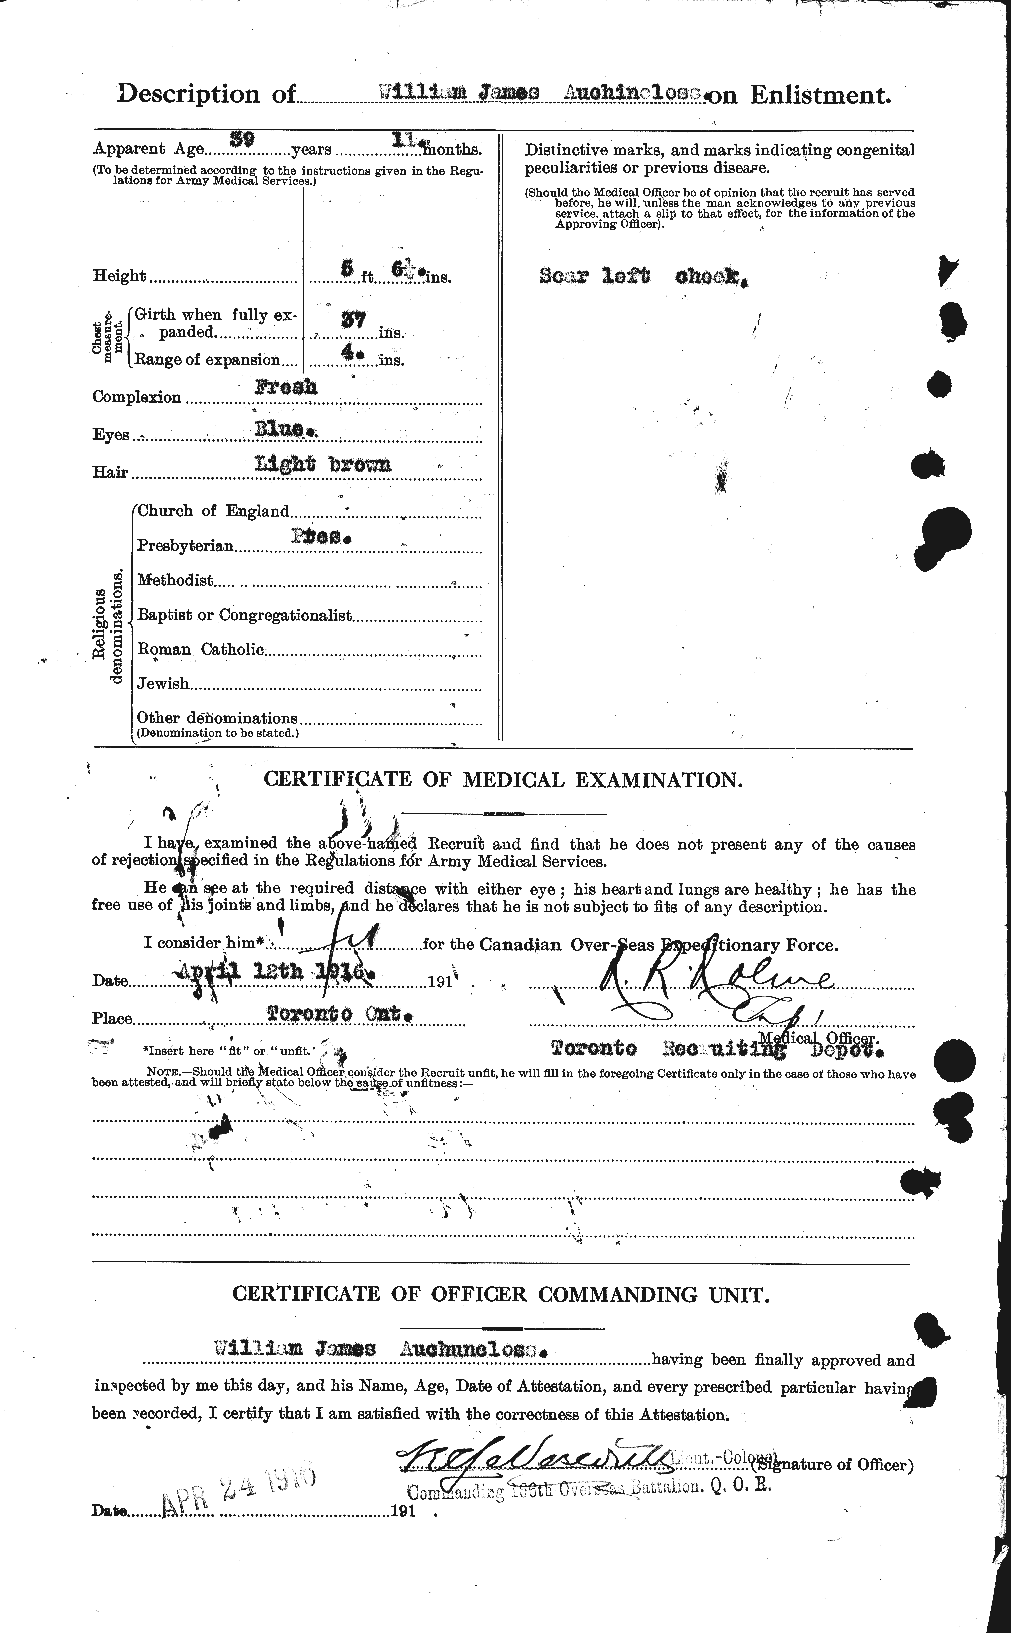 Personnel Records of the First World War - CEF 224610b